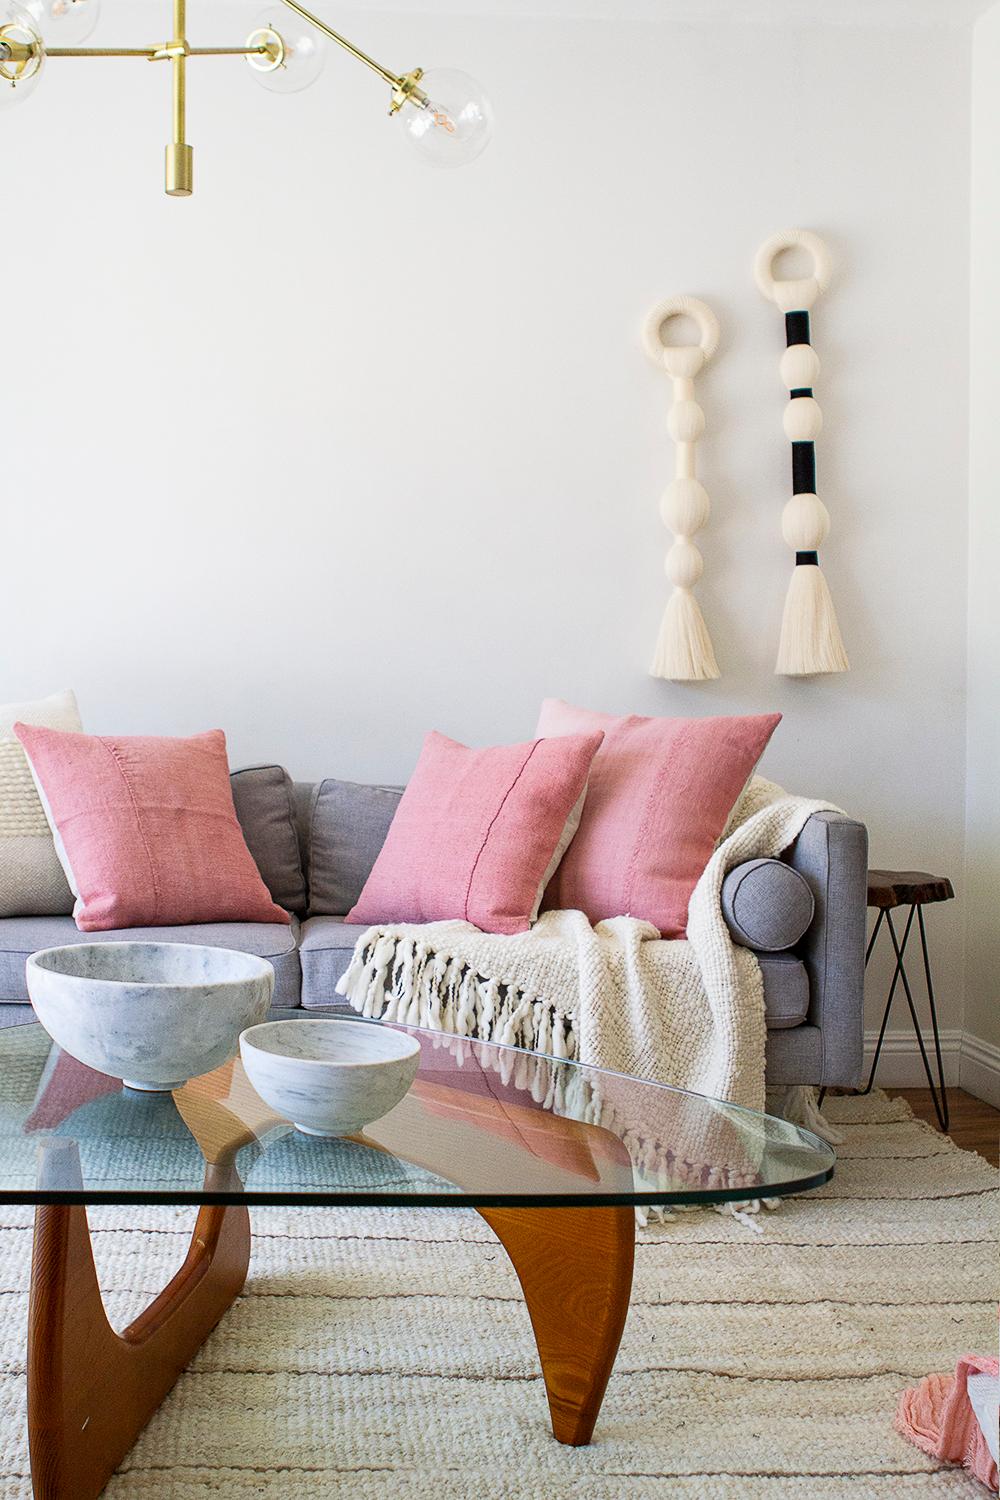 These hand made pink ombre cushions are the perfect pop of color to brighten up your space. Hand made from natural materials like vintage linen, they are sure to make your living room or bedroom feel more modern while adding a rustic charm. With